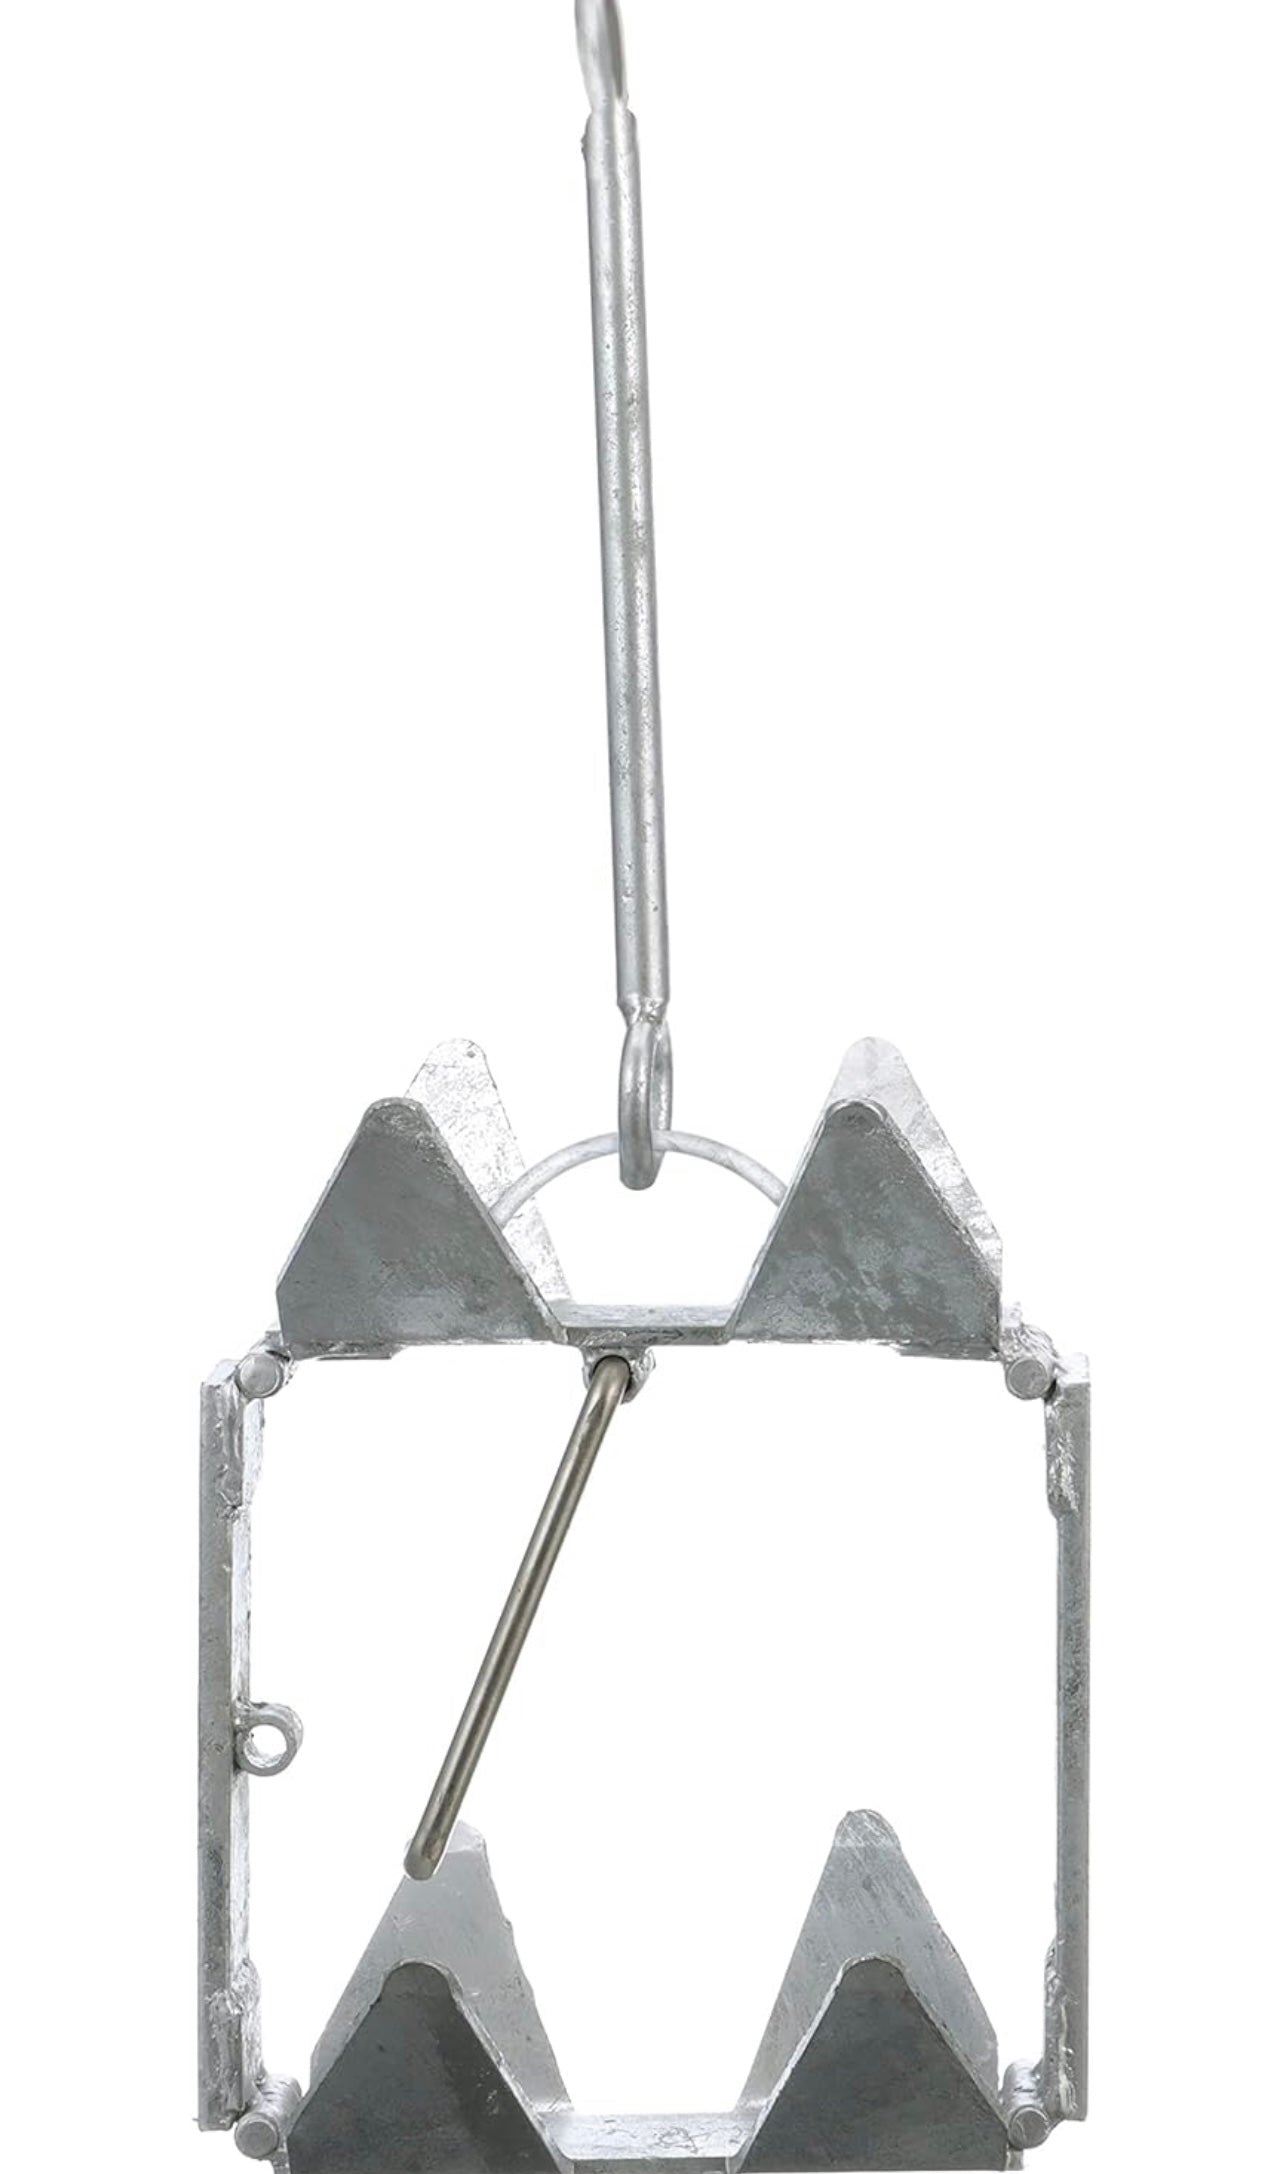 Seachoice Hot-Dipped Galvanized Steel Fold-and-Hold Anchor 19lbs